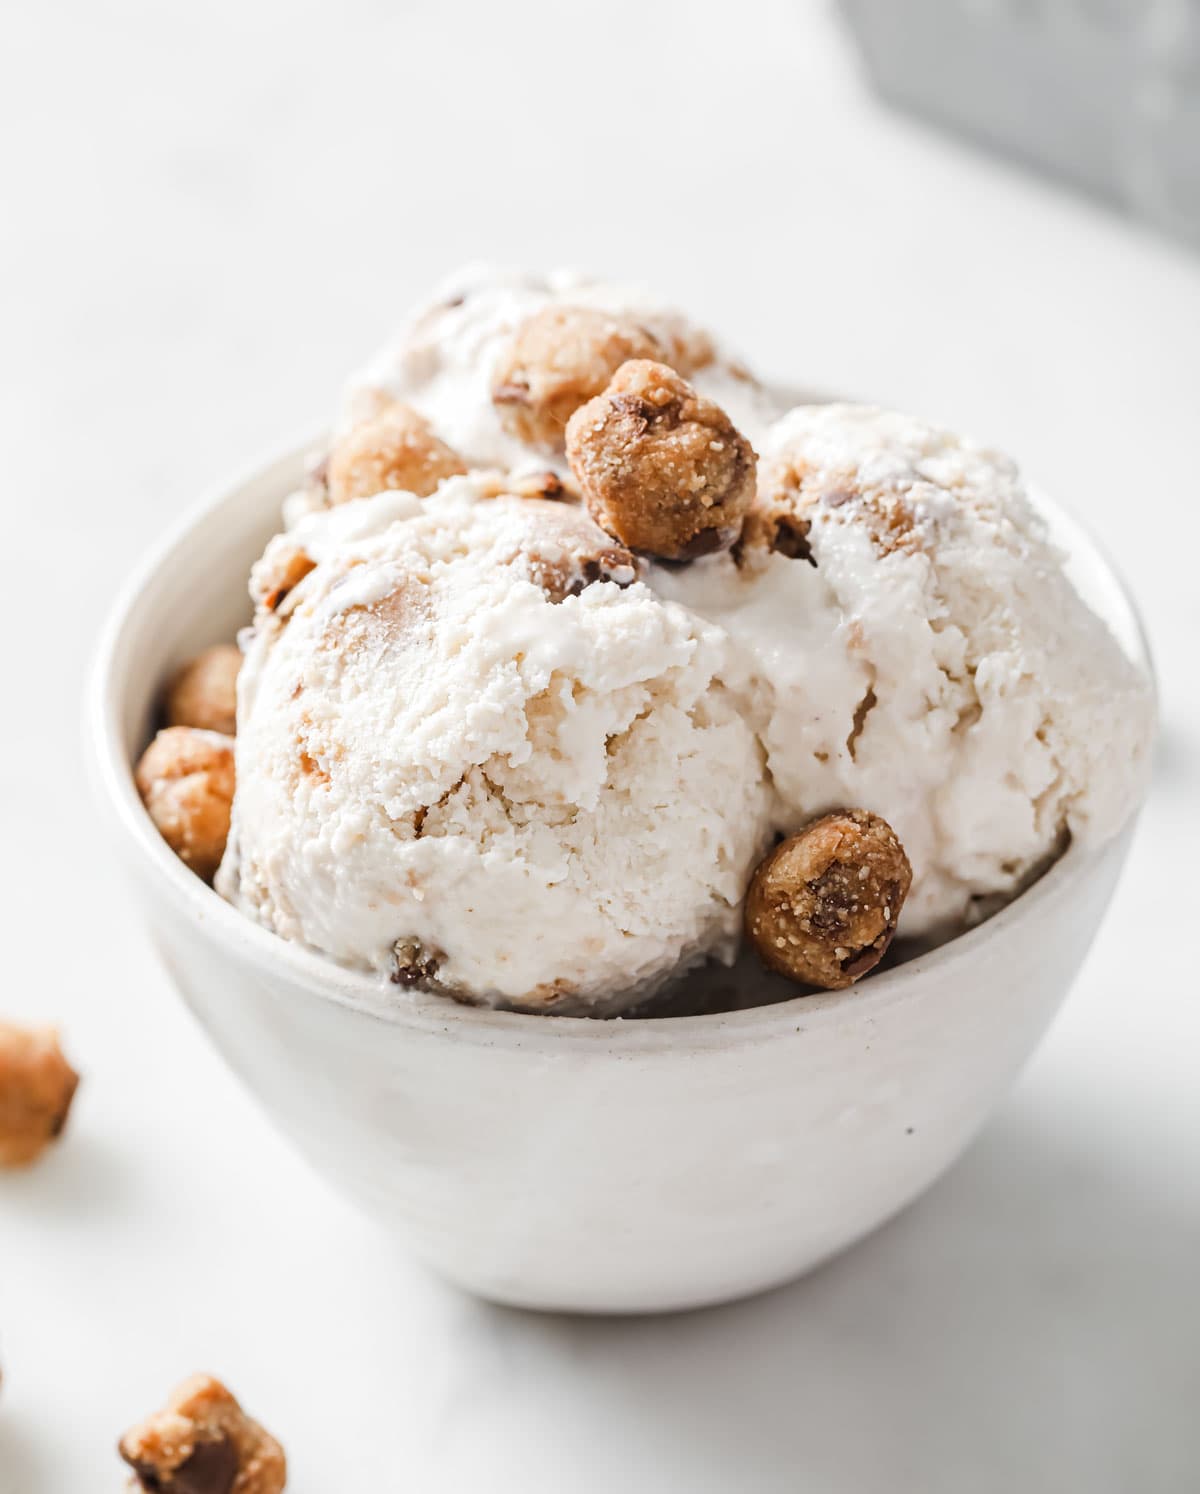 Ice cream scoops in a bowl with cookie dough balls